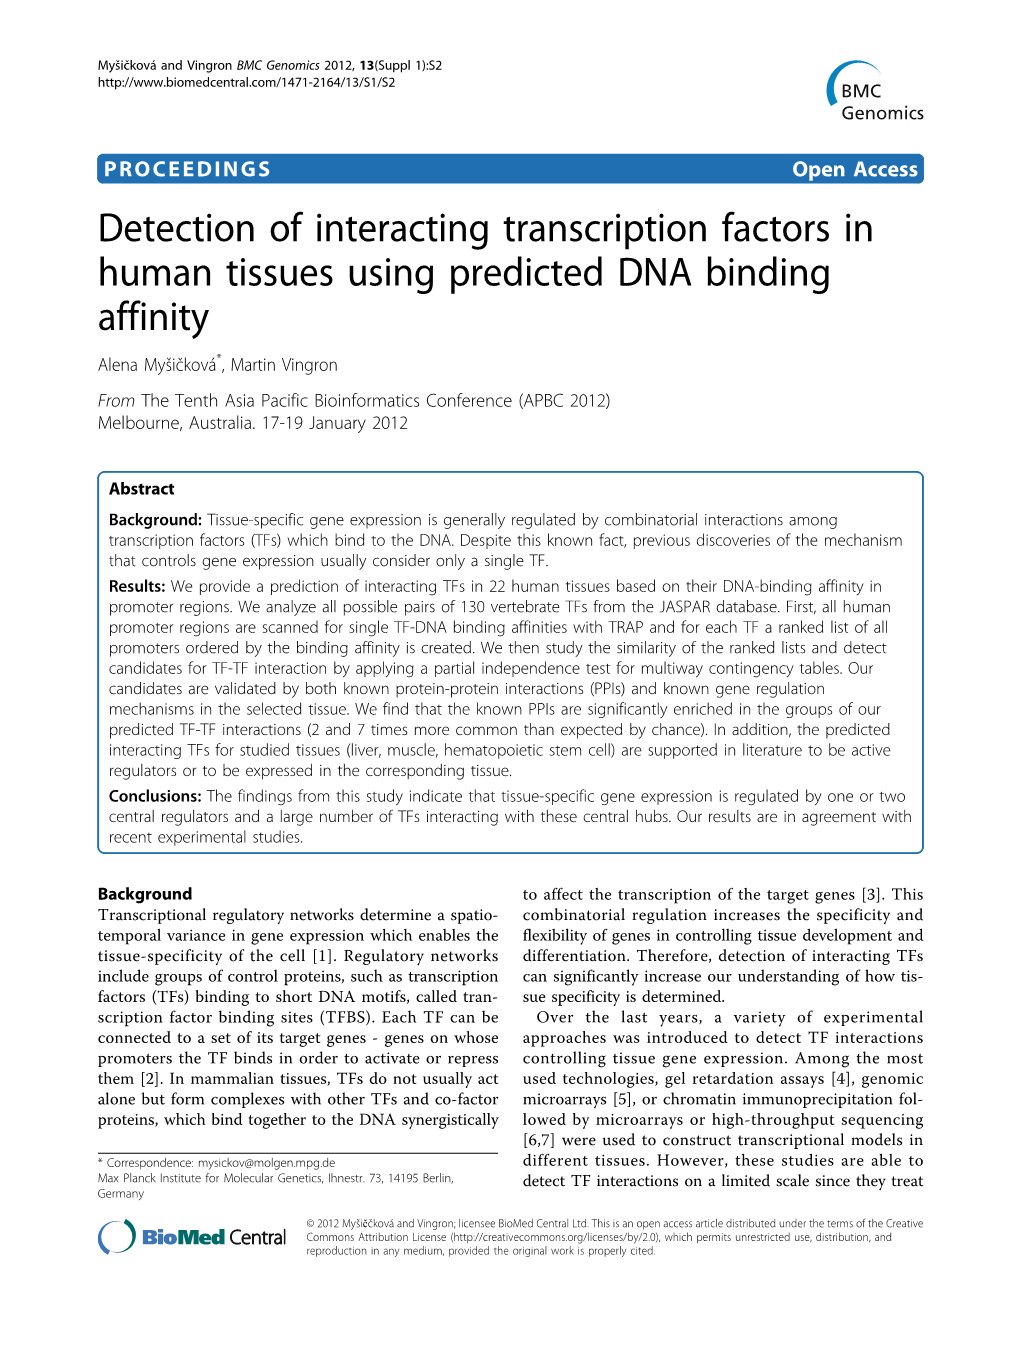 Detection of Interacting Transcription Factors in Human Tissues Using